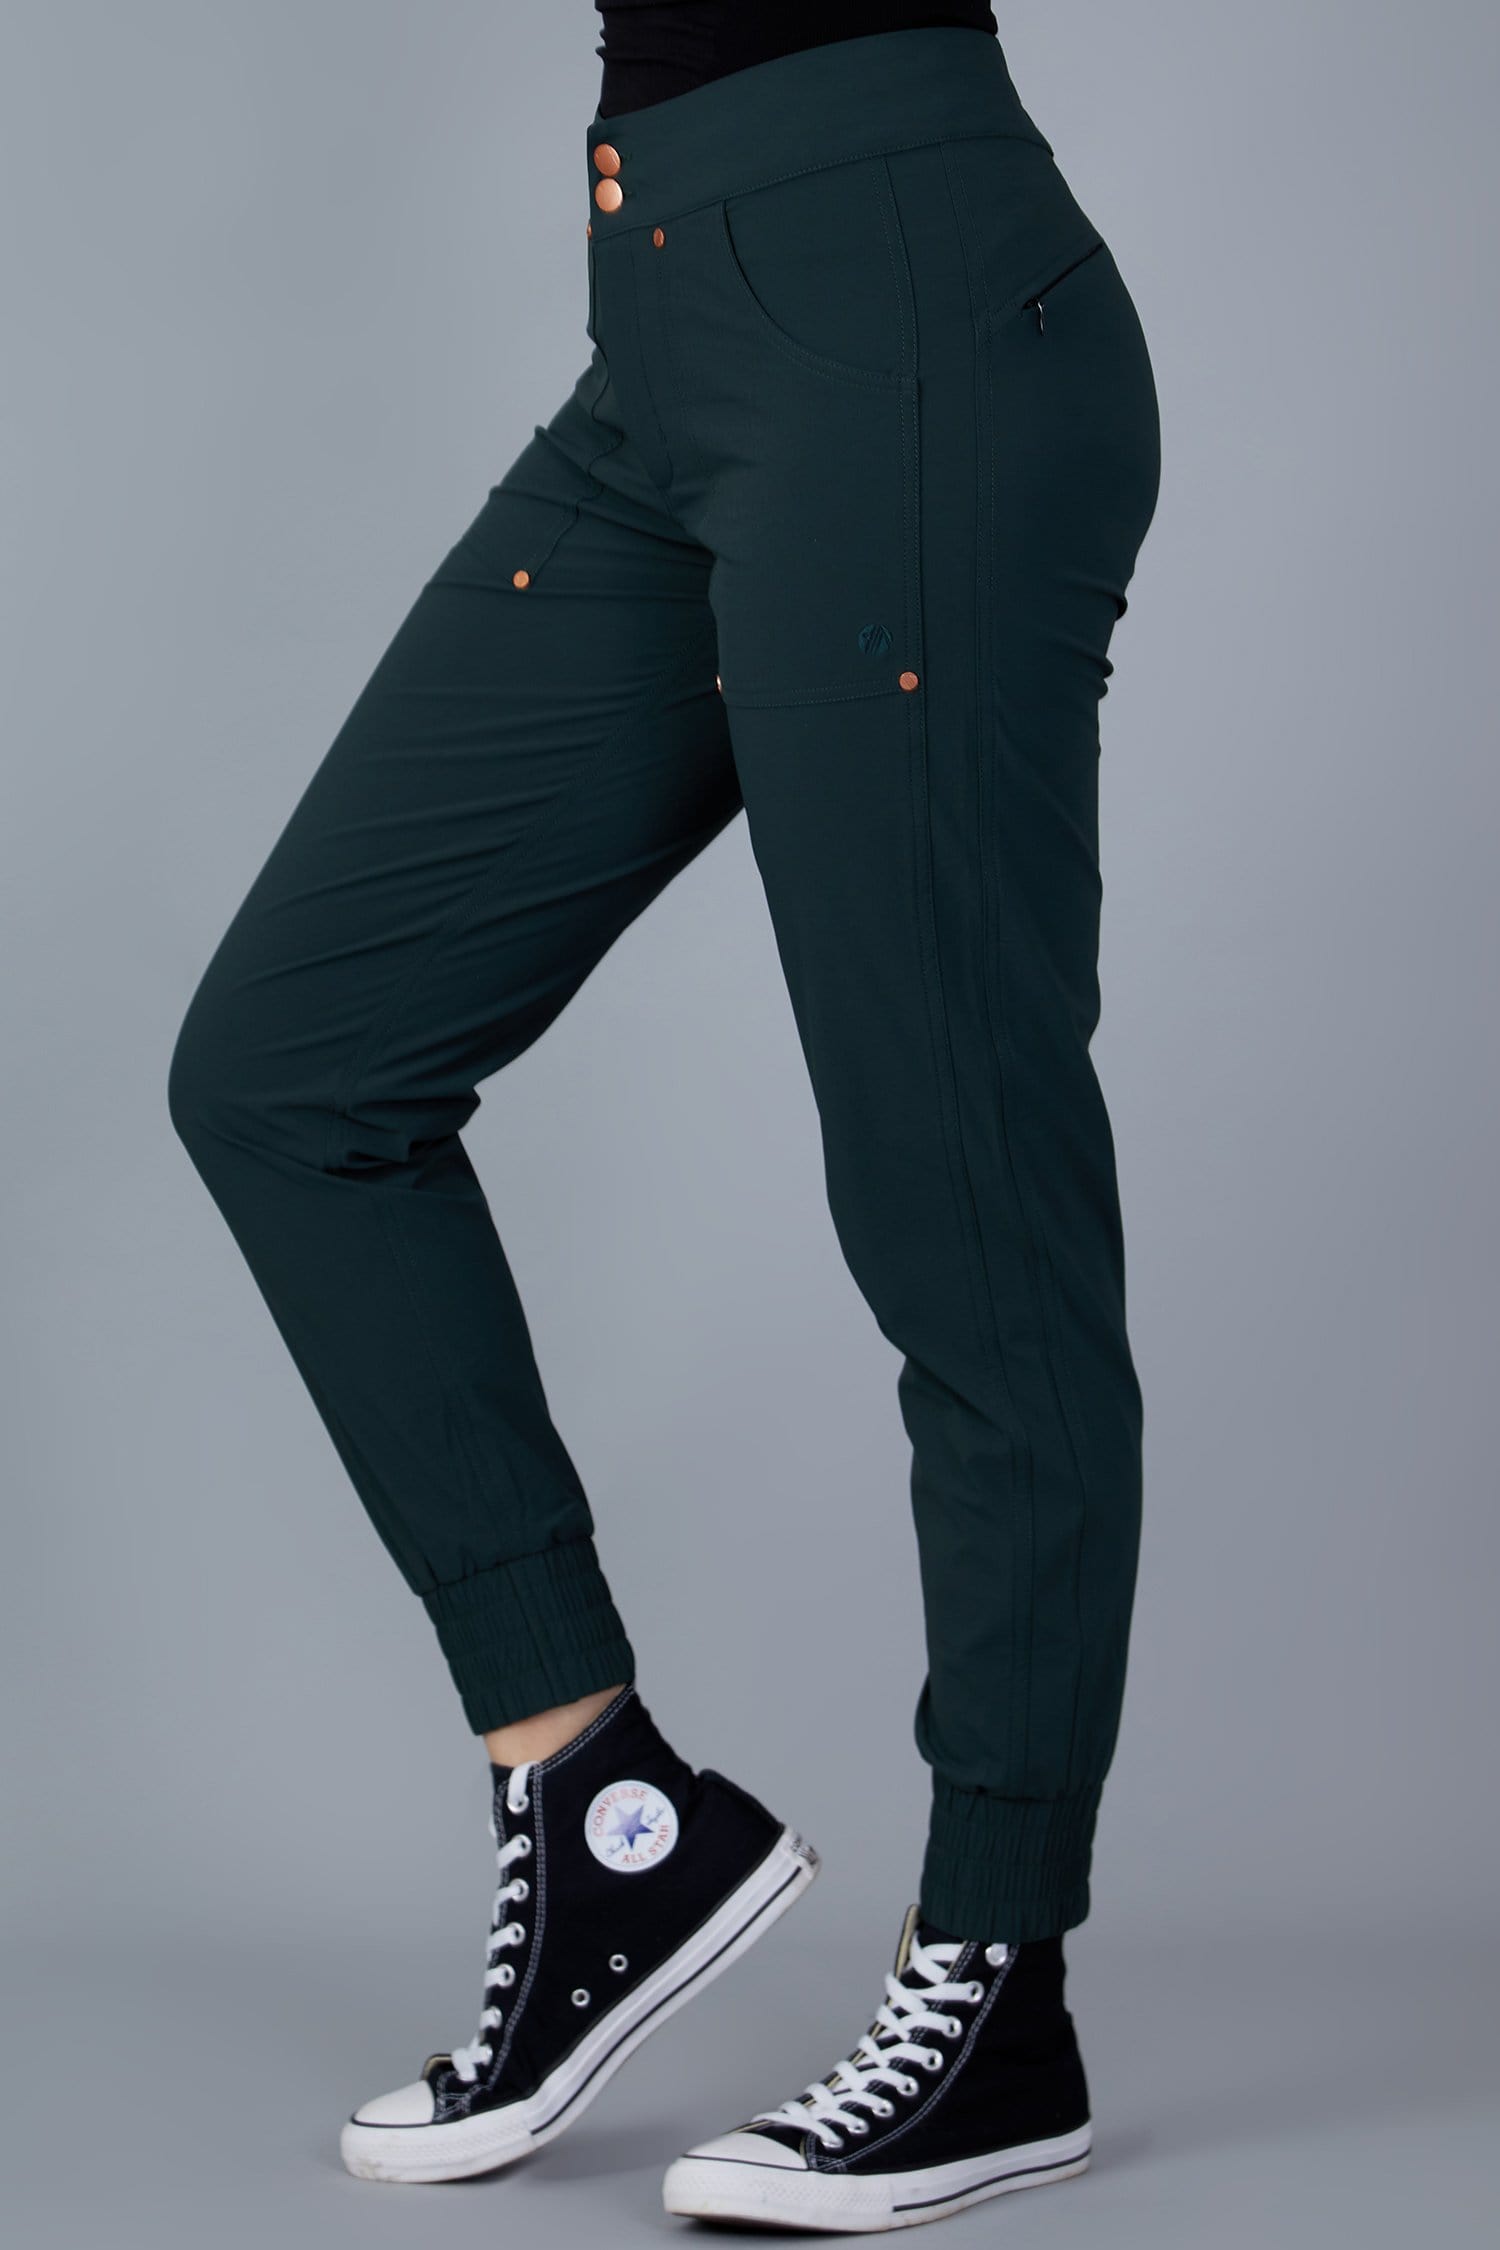 Casual Stroll Pants - Forest Green - 32r / Uk14 - Womens - Acai Outdoorwear